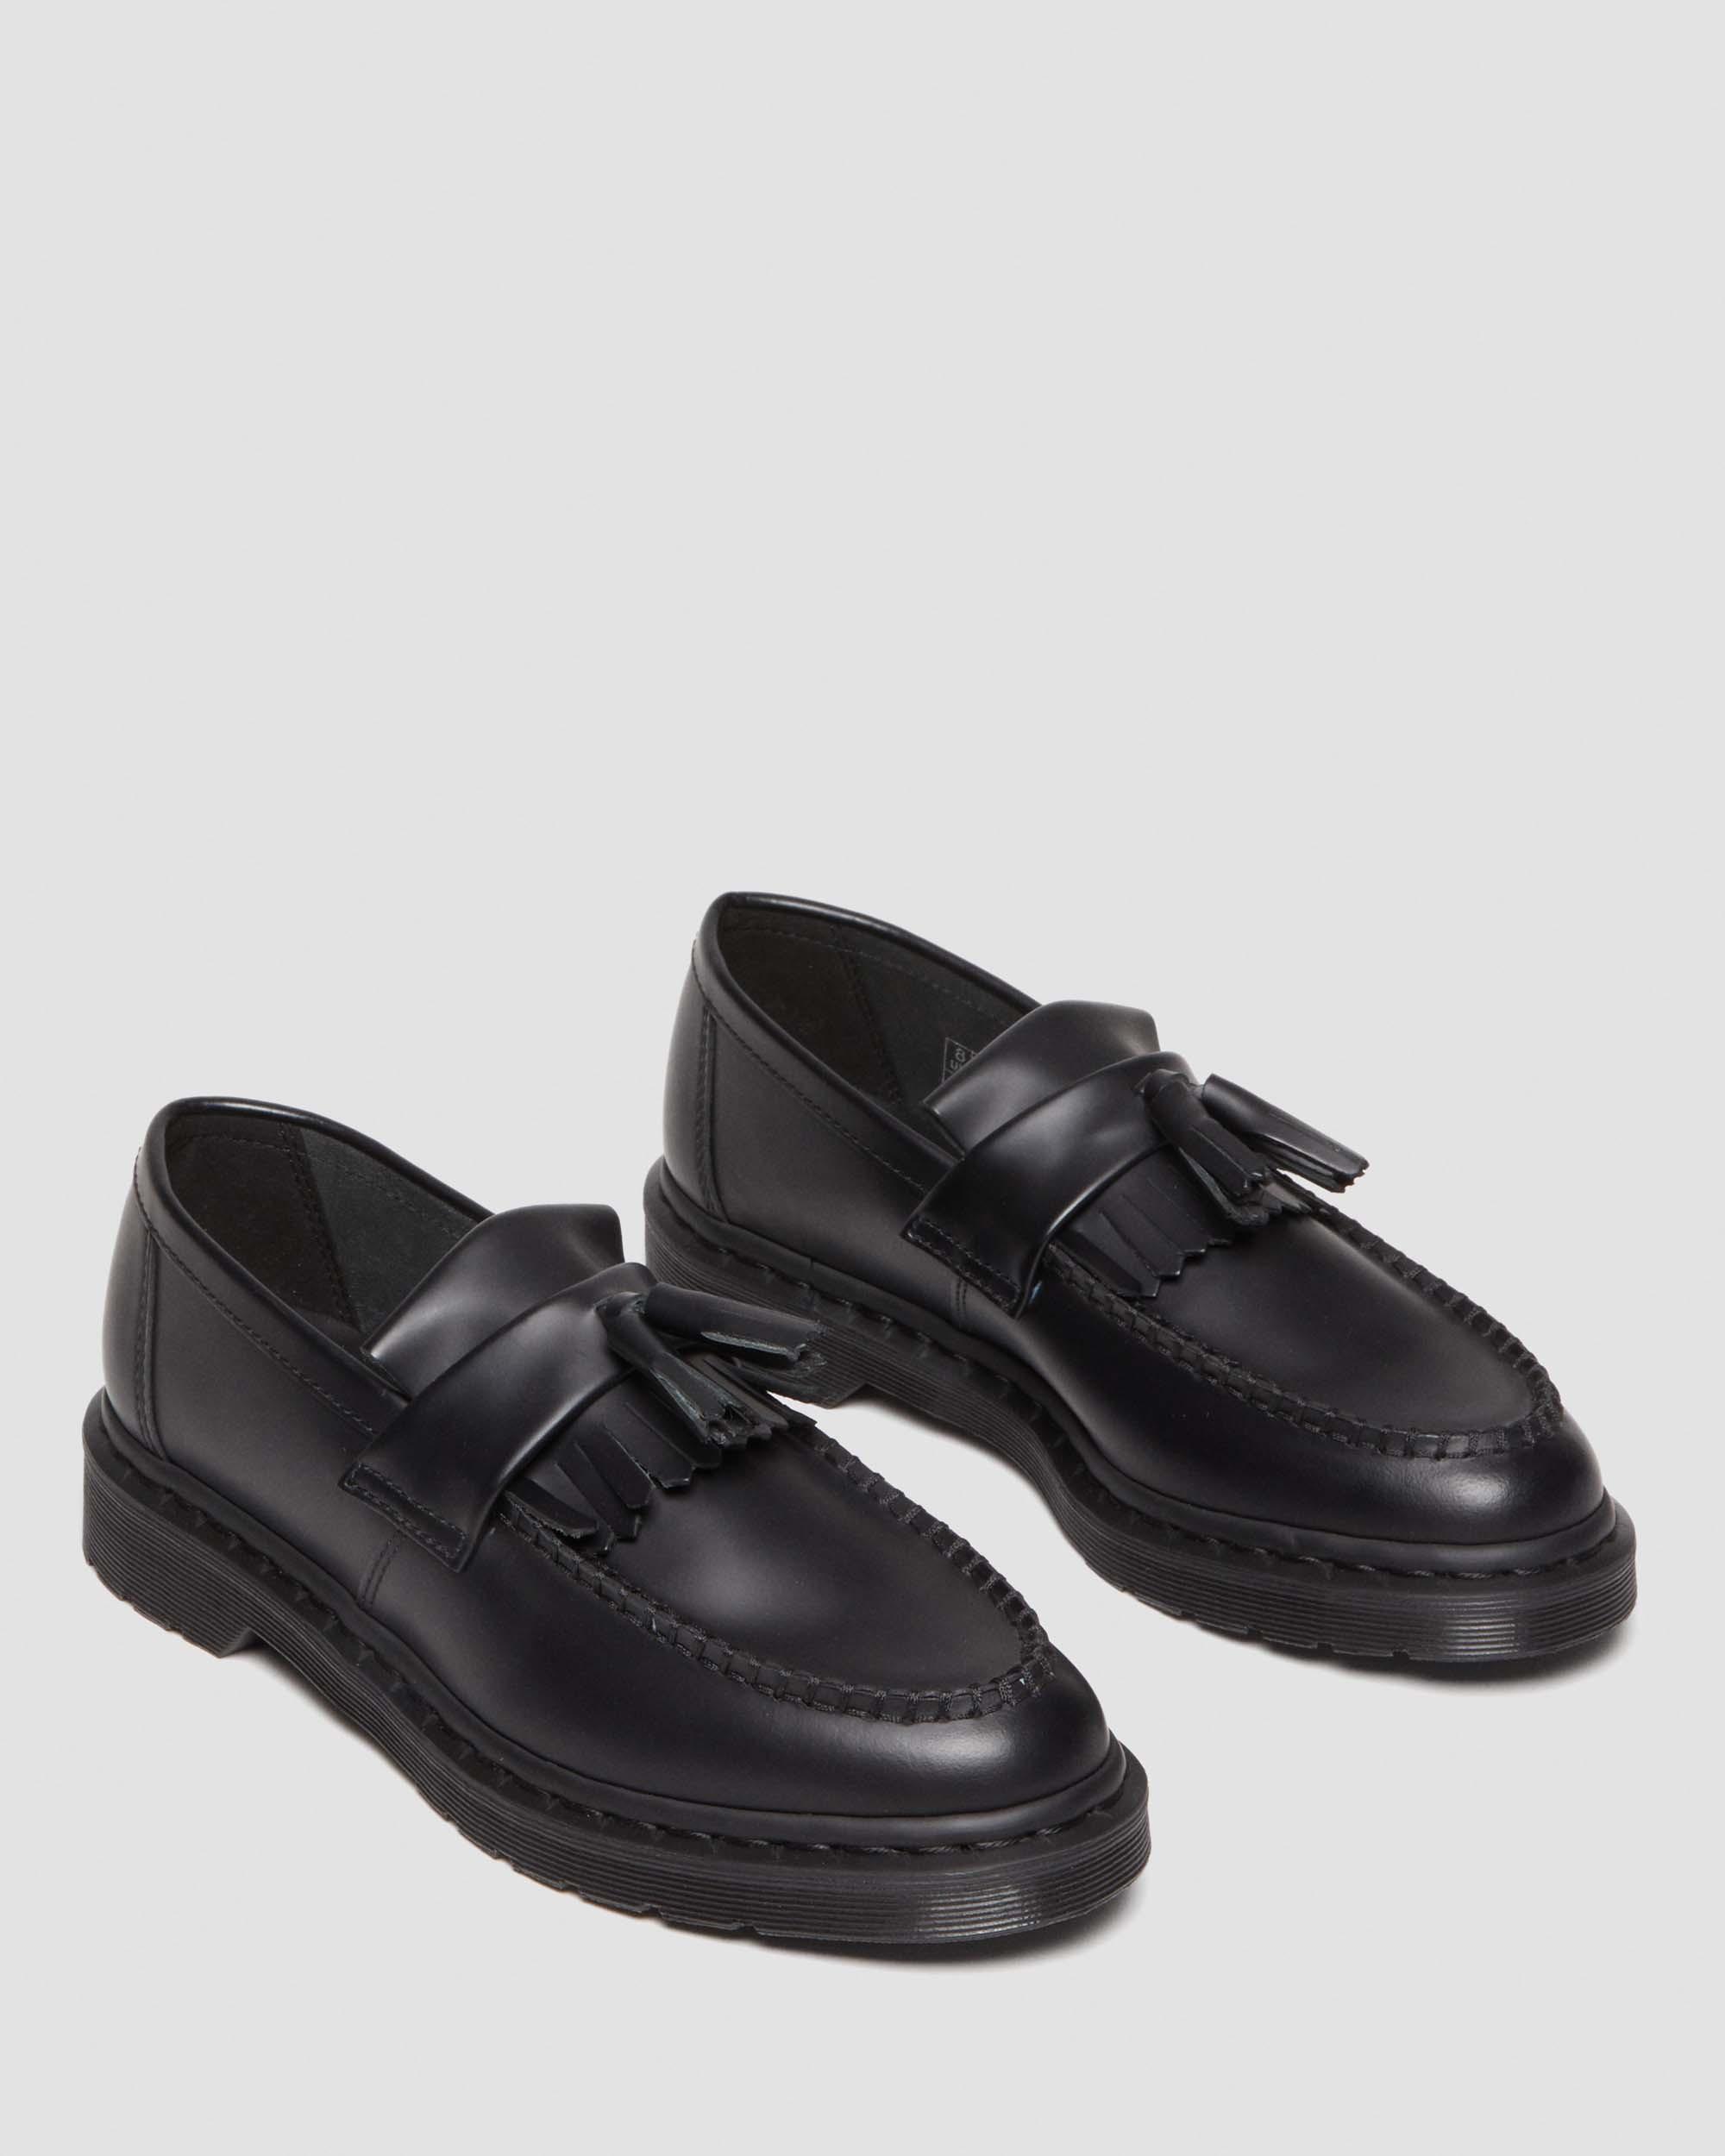 Adrian Mono Smooth Leather Loafers, Black | Dr. Martens